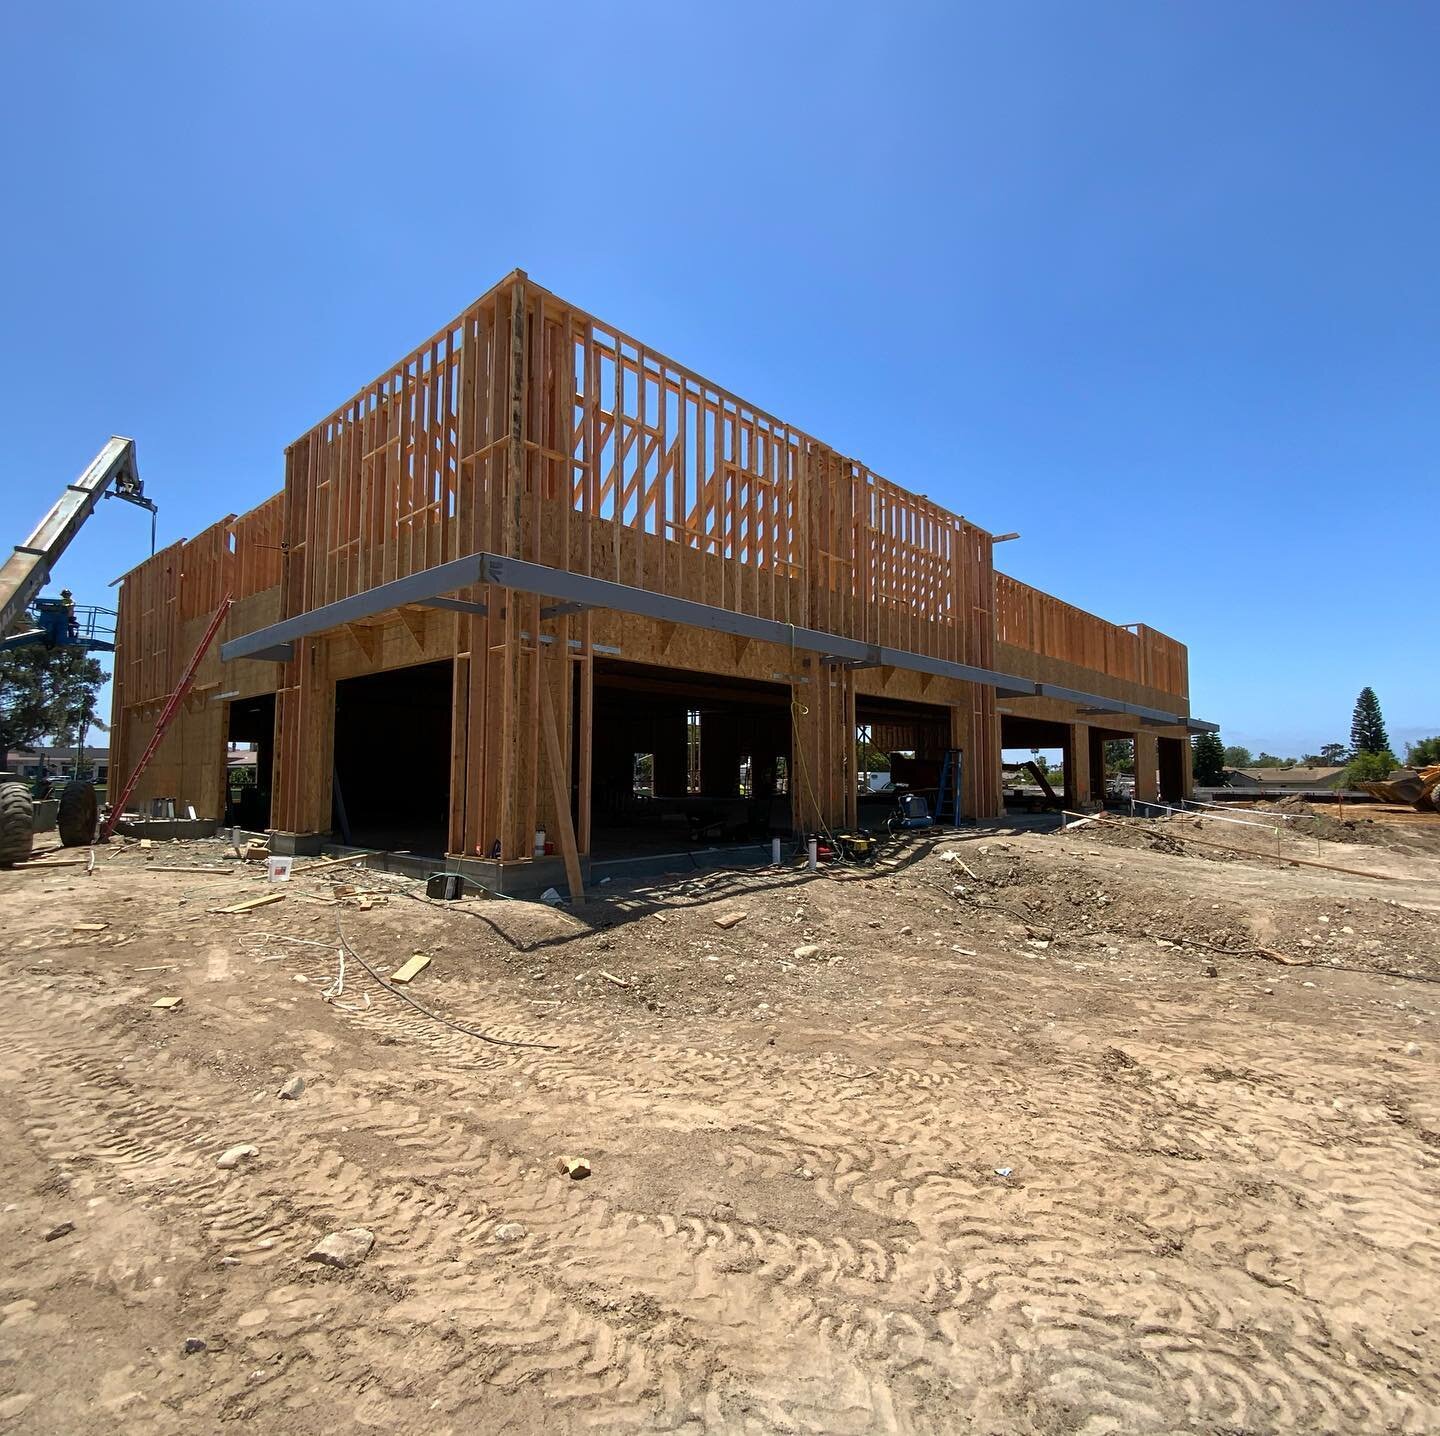 Building B is up and ready to be roughed in! There are 2 of these that will go perpendicular to each other in #miramesa #electricians #construction #jobsite @brixmorpropertygroup @parkway.construction